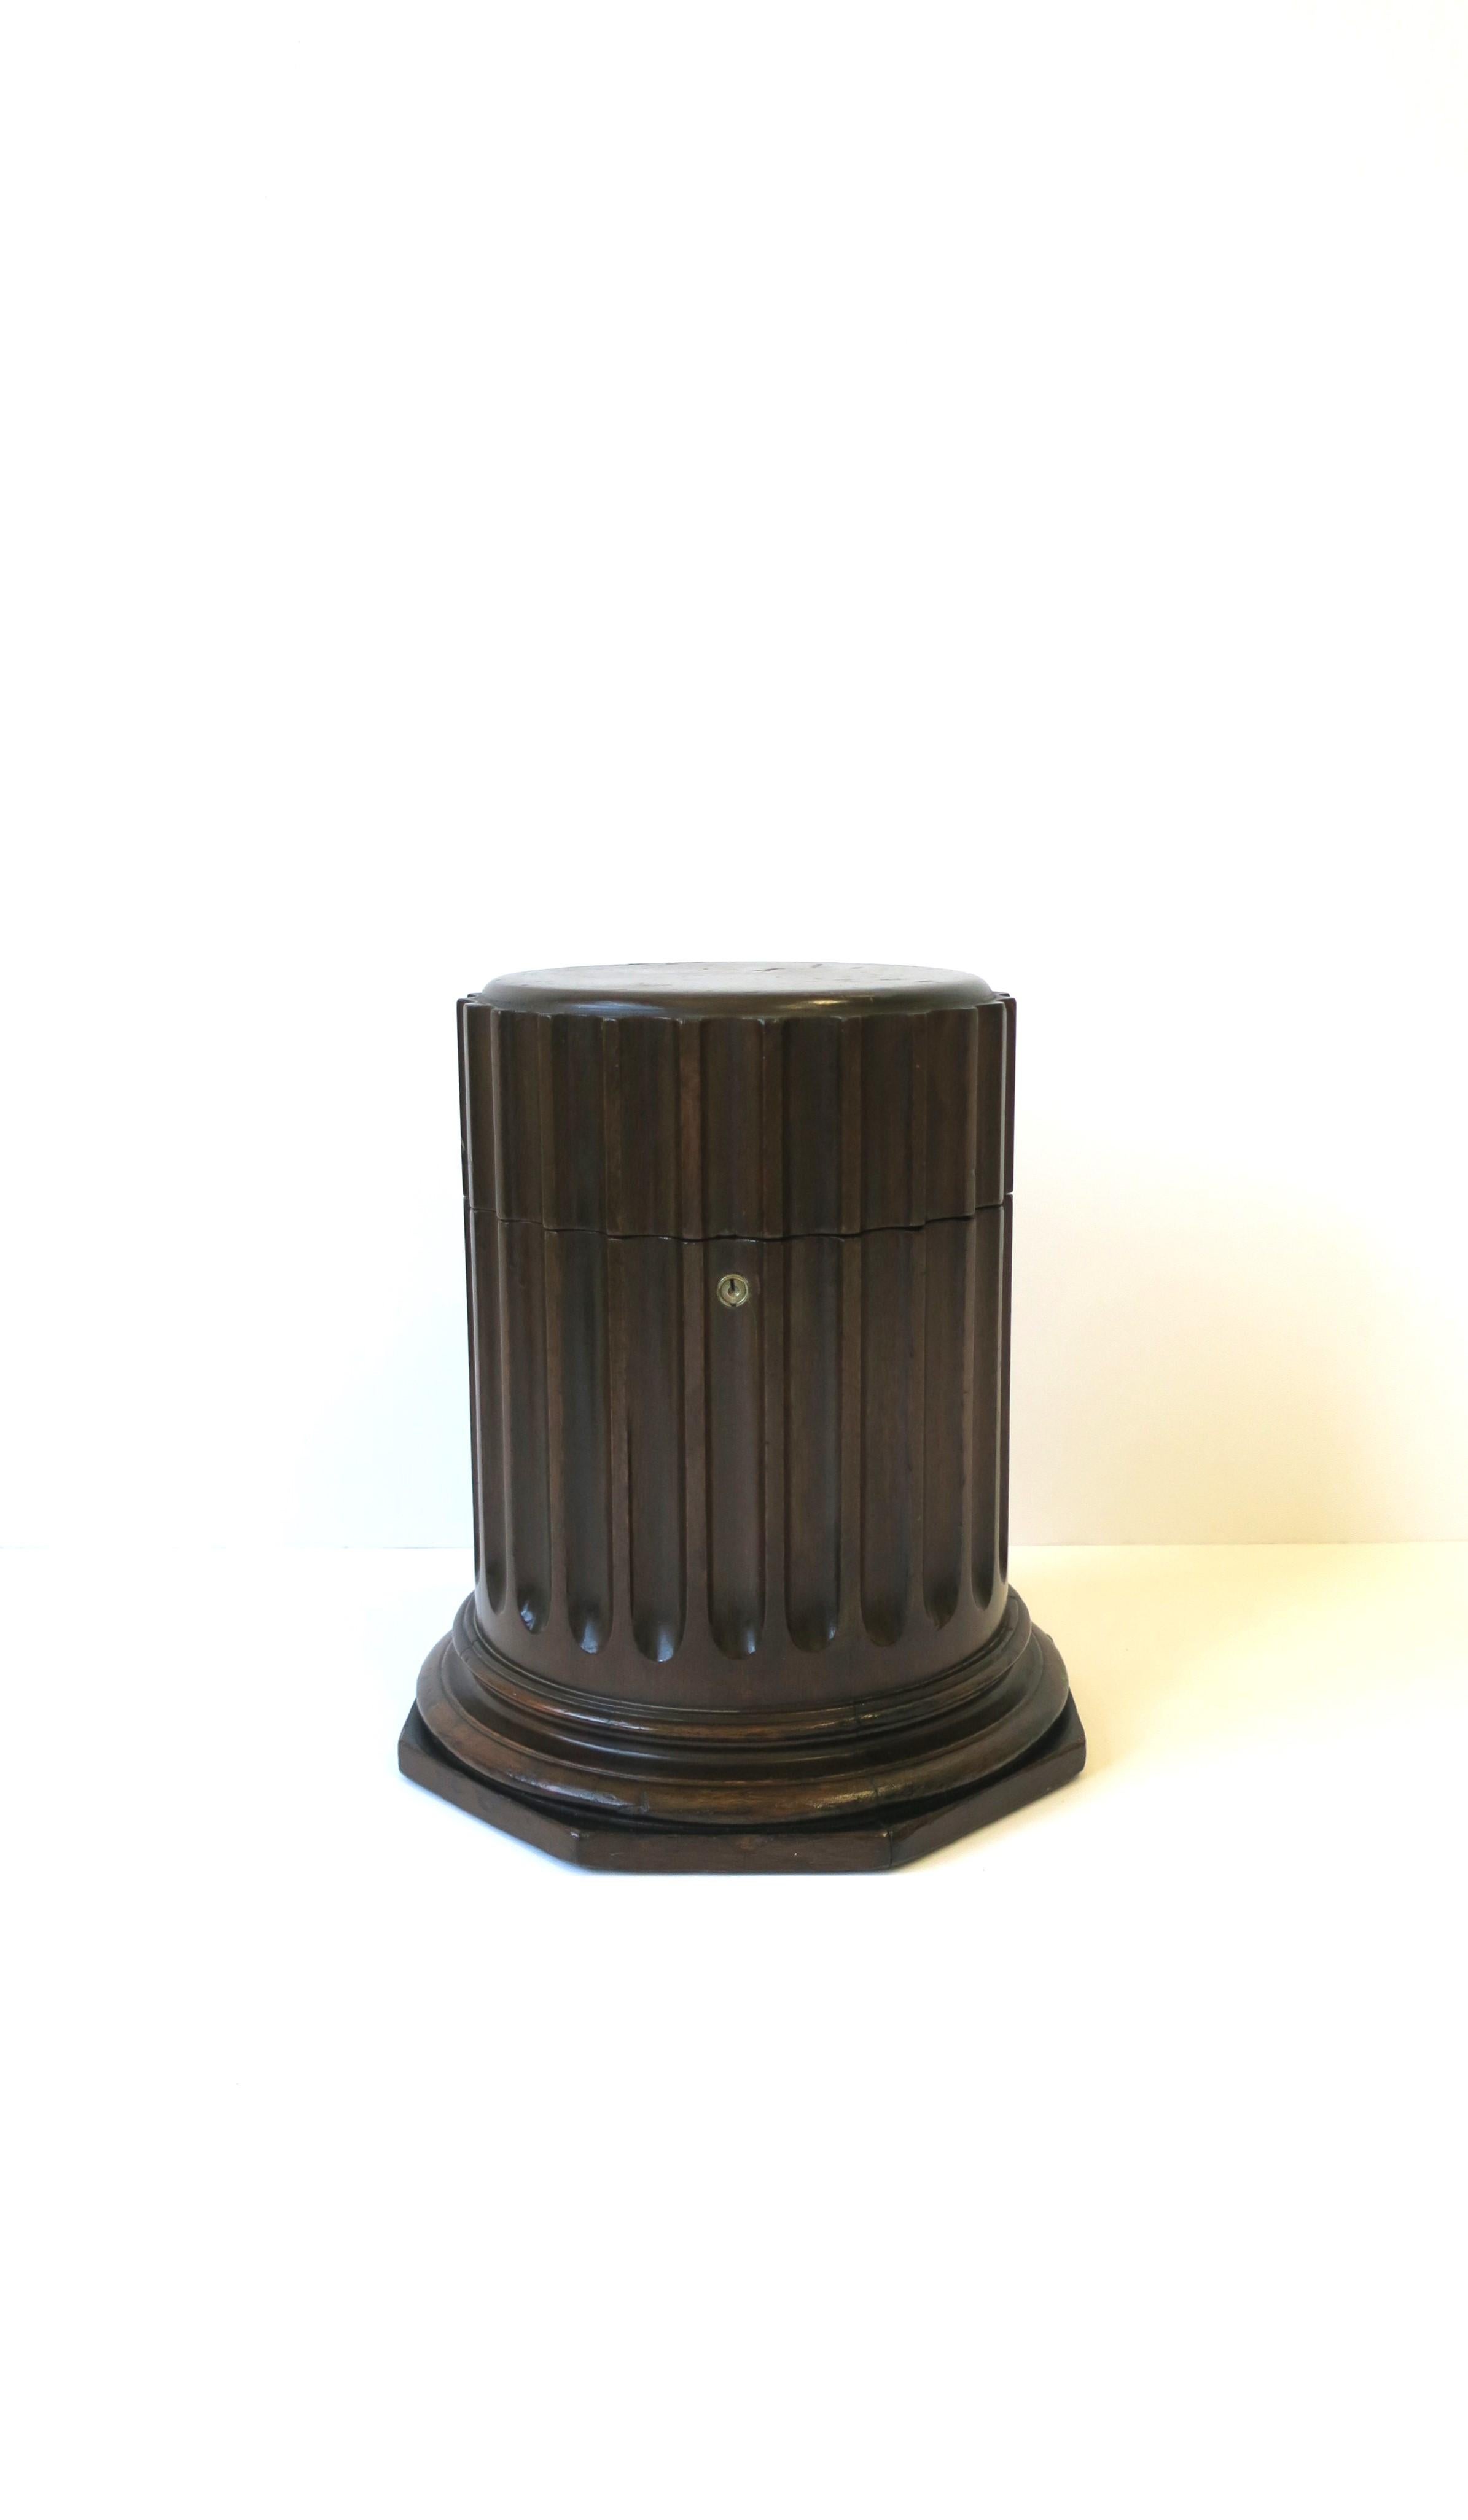 American Column Pedestal Box Neoclassical Style For Sale